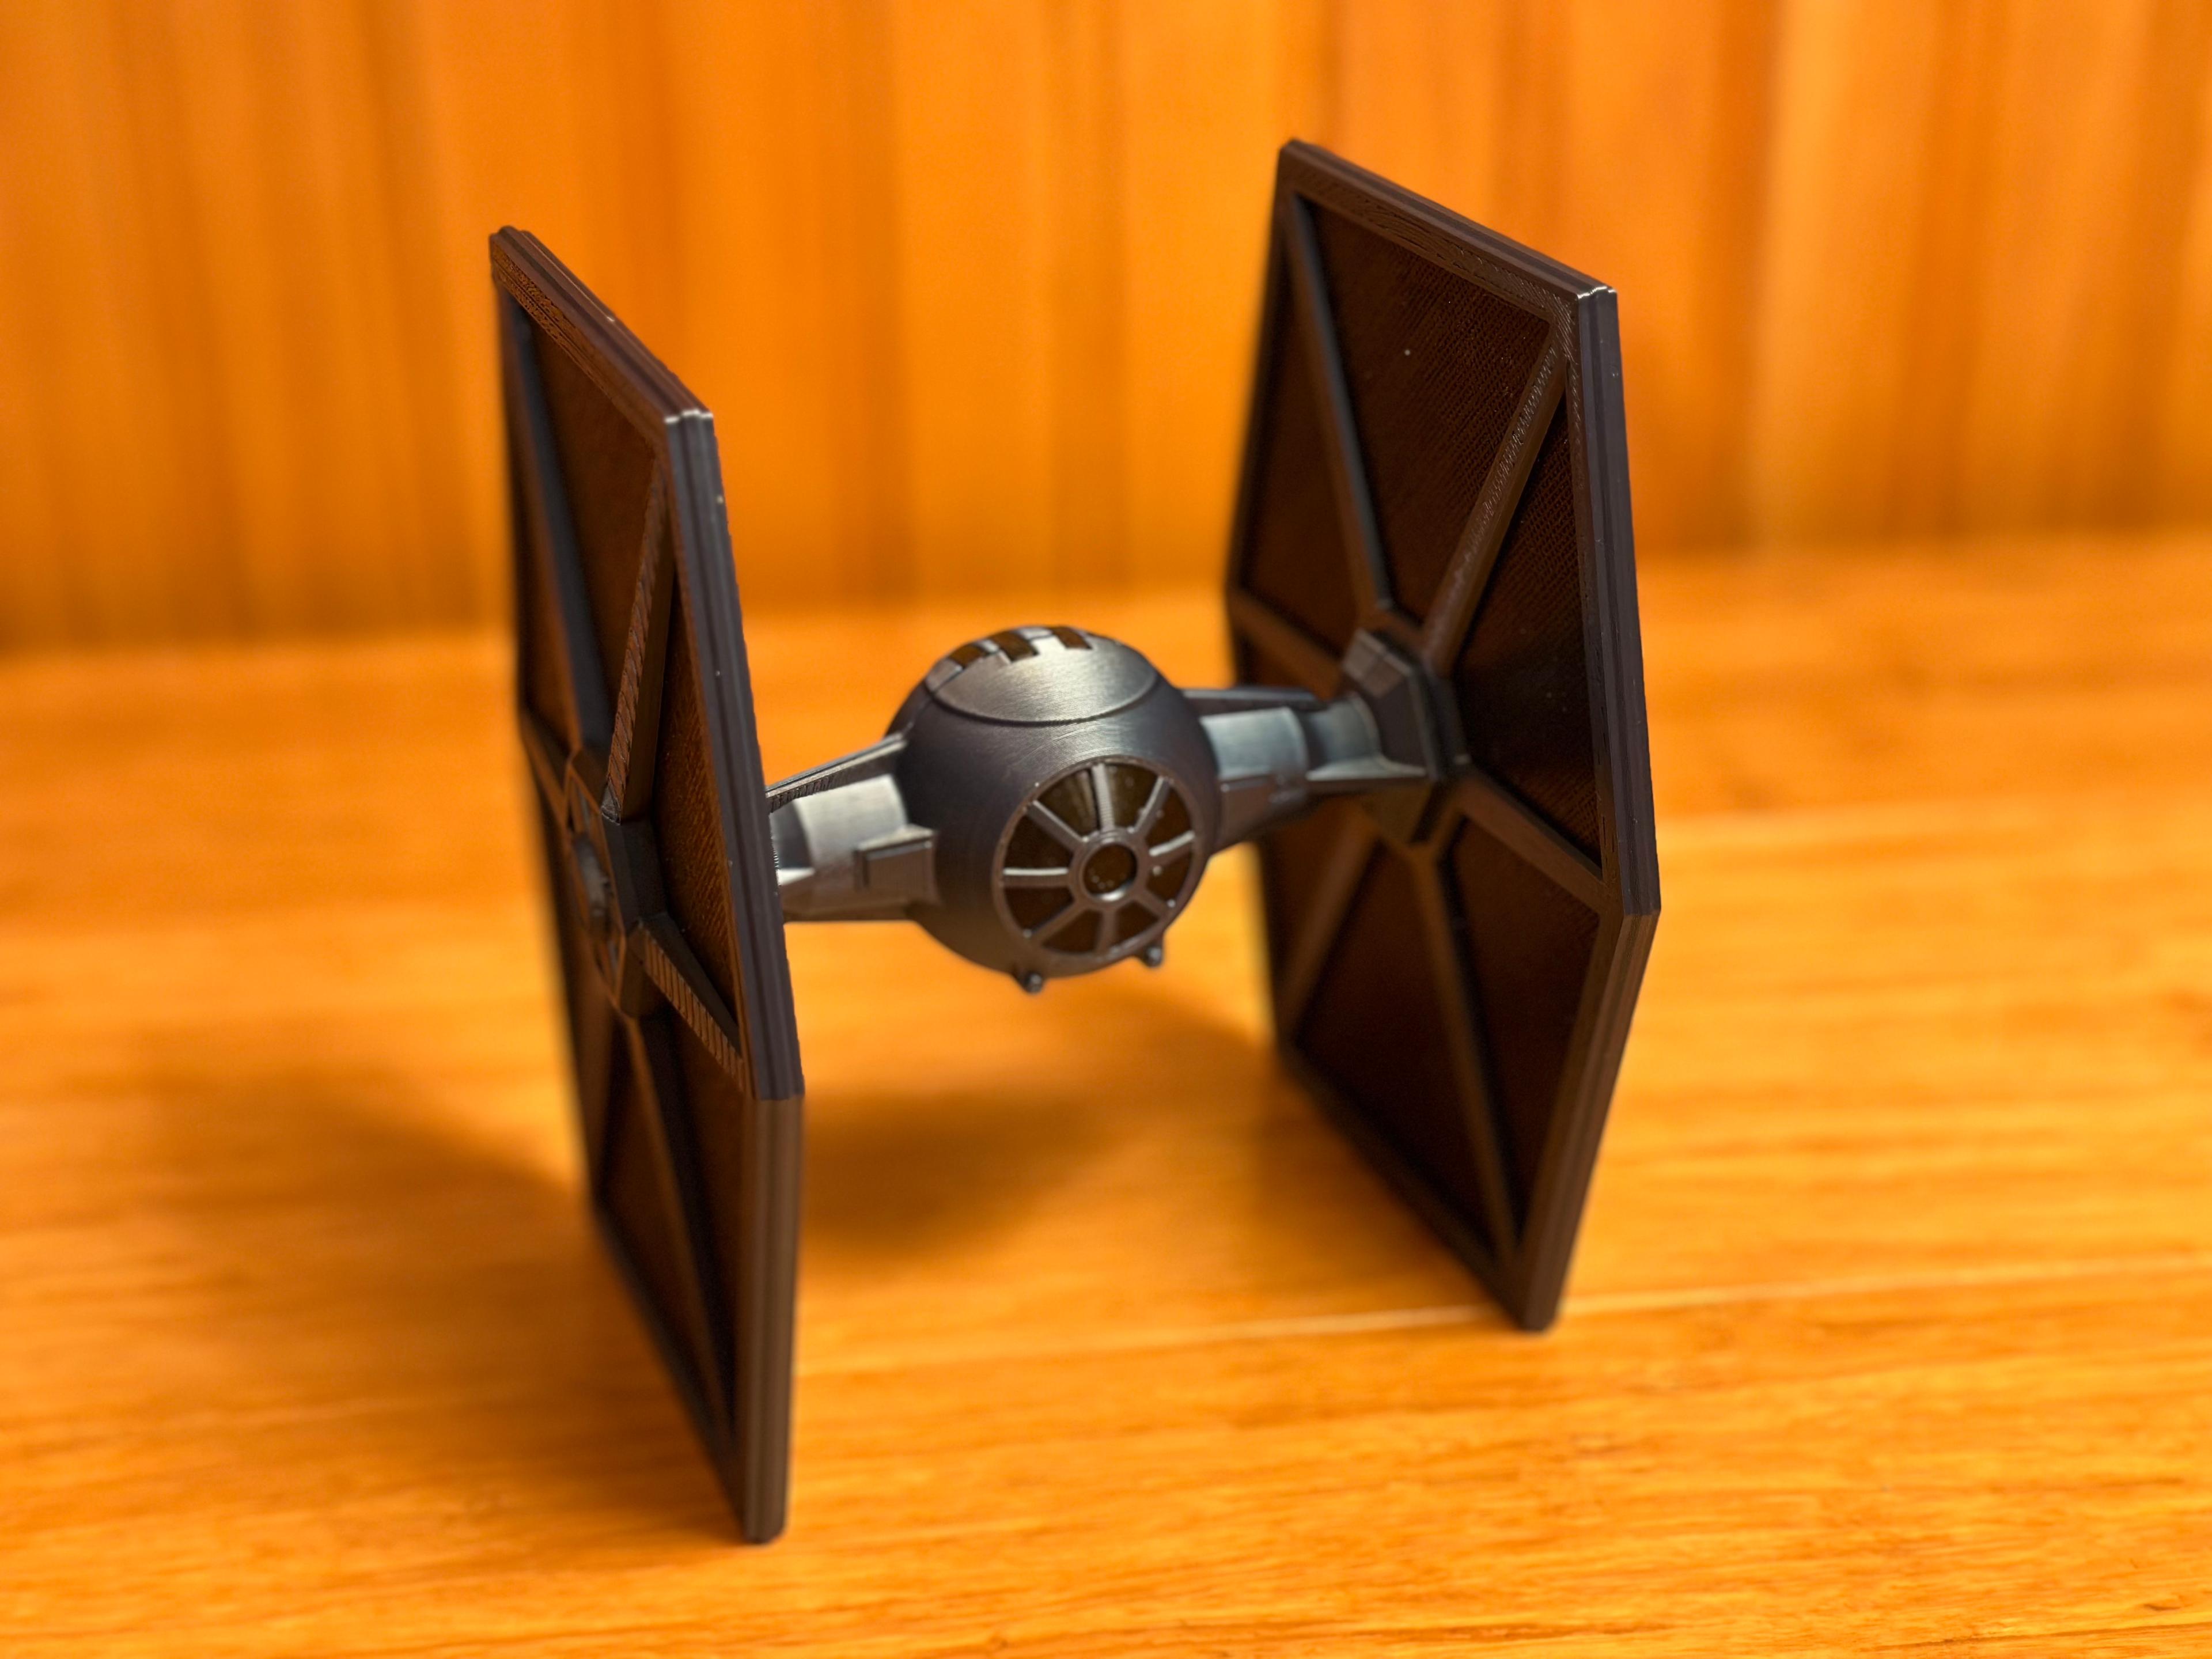 TIE Fighter Kit - In a Cobalt Blue Metal for that darker look vs. the traditional silver - 3d model